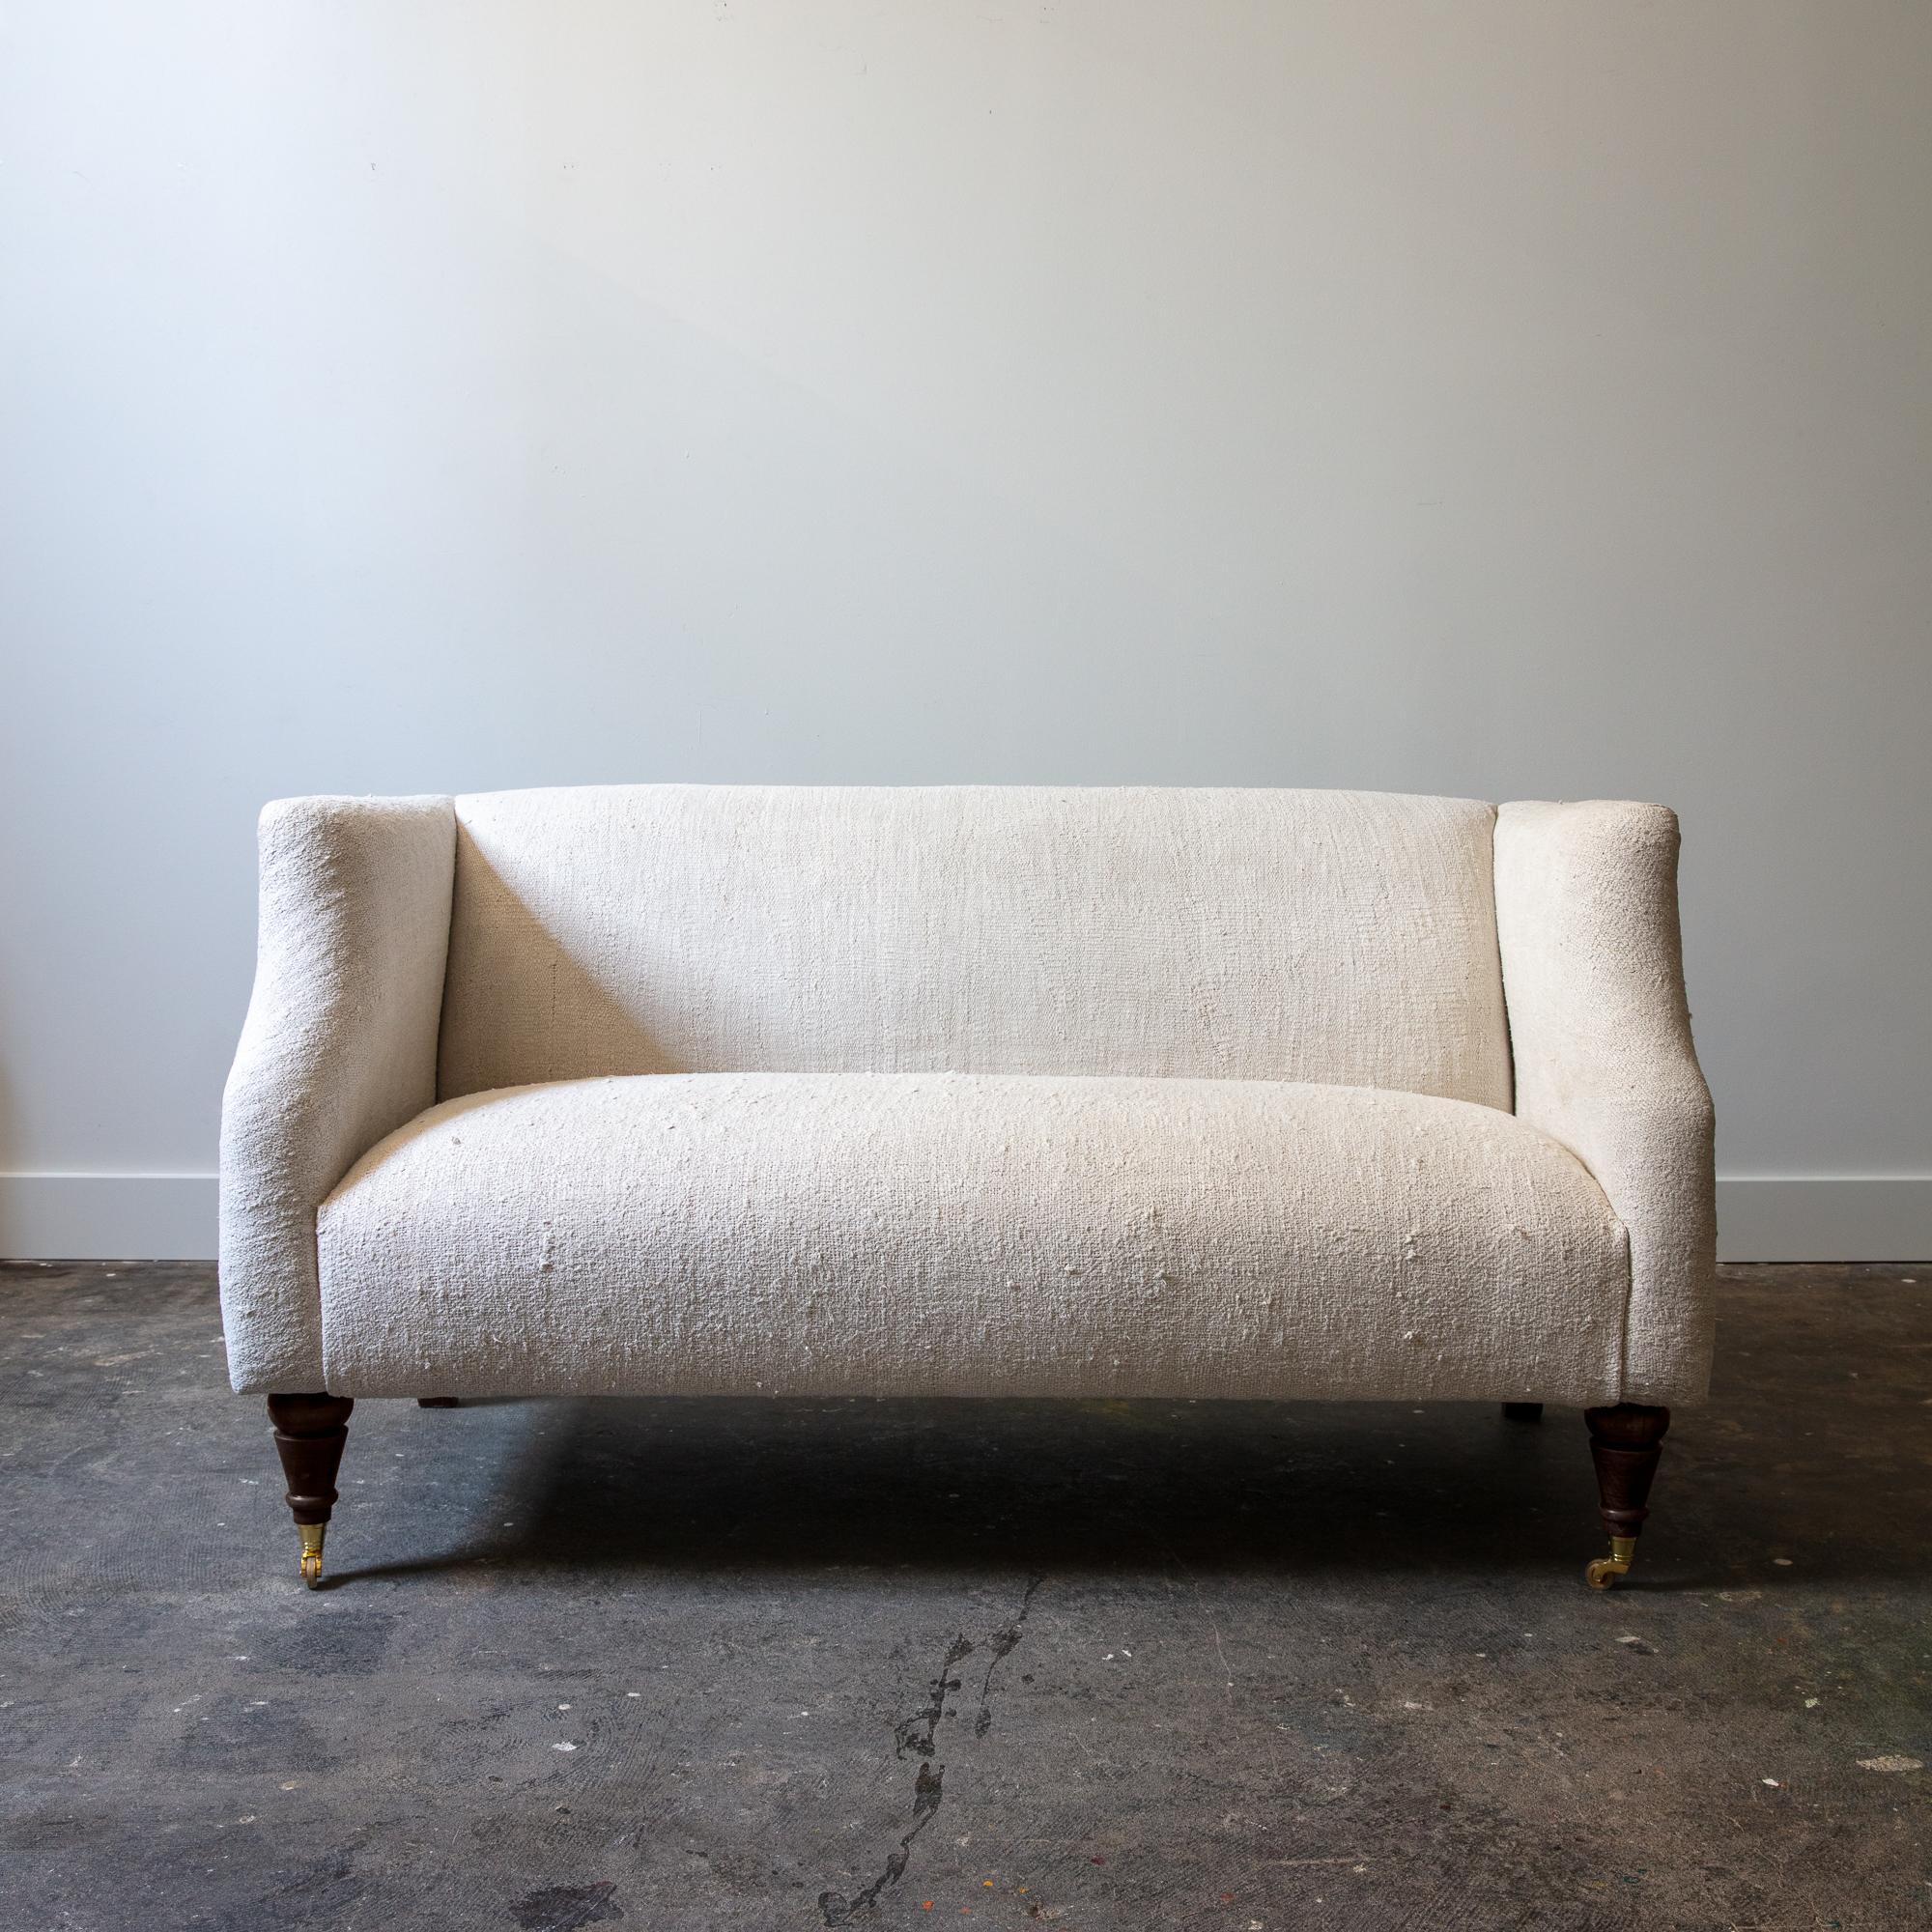 A classic shape updated with Turkish Hemp upholstery